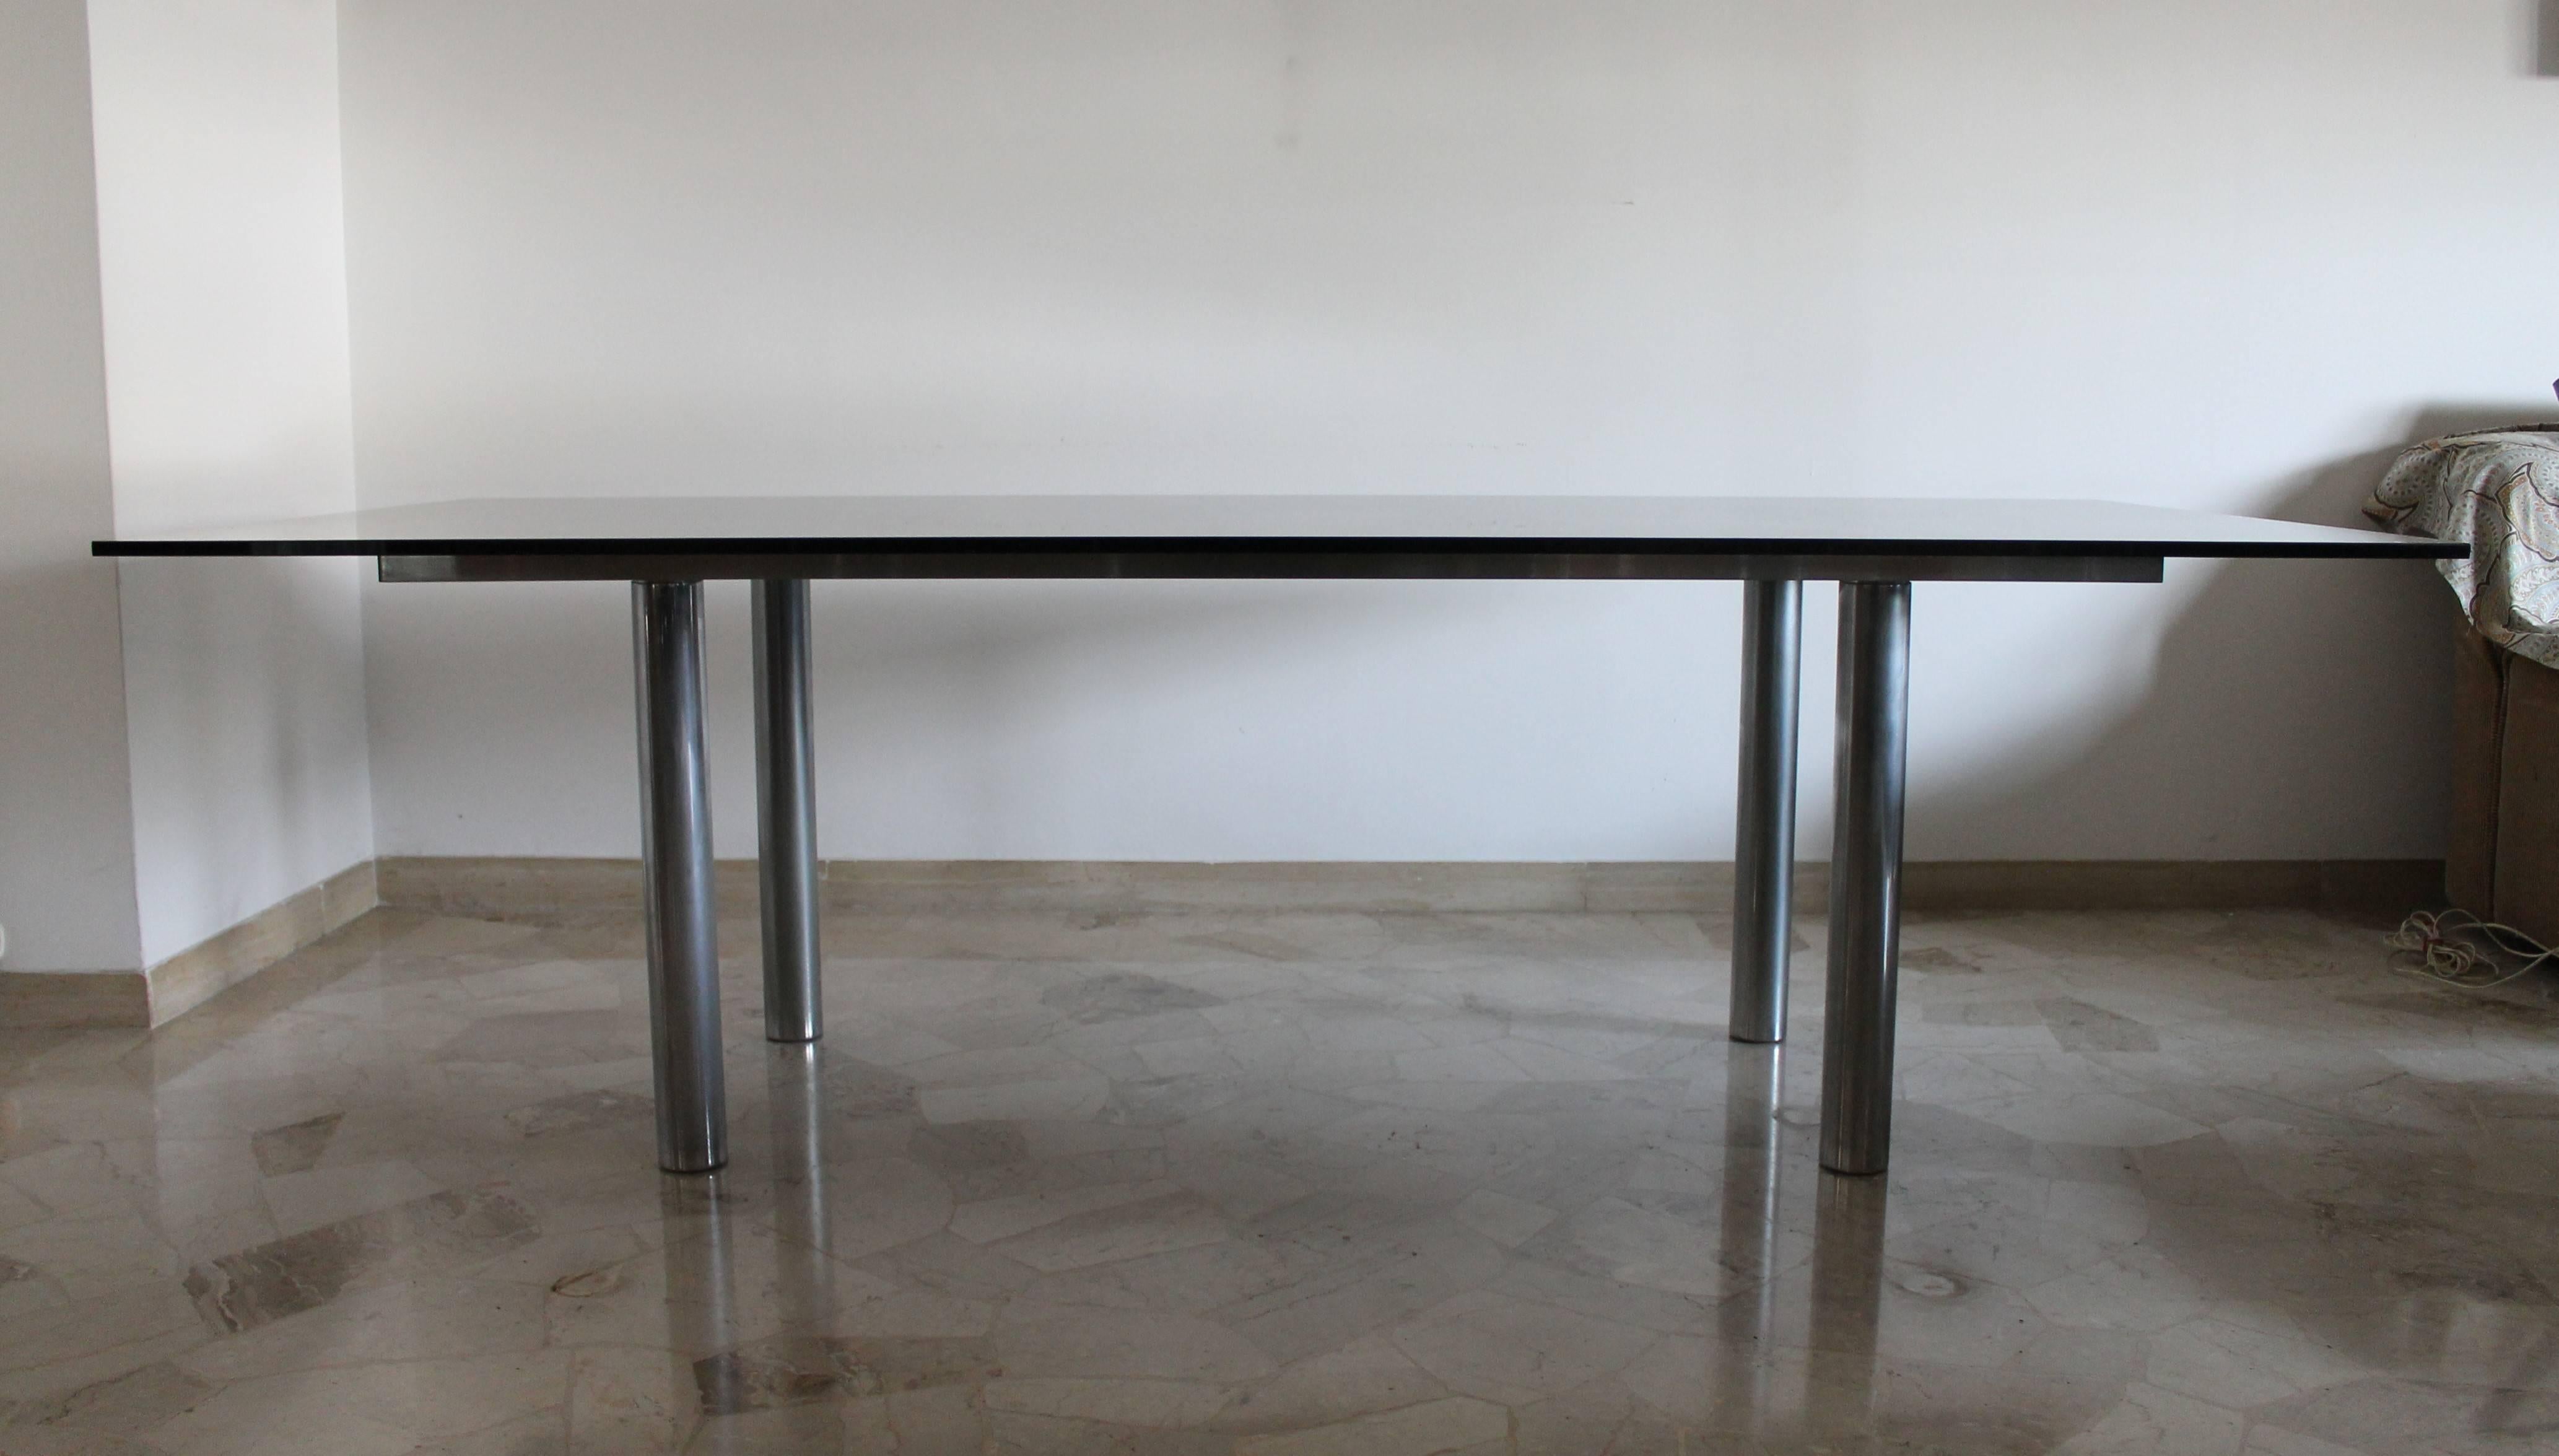 Andre dining table XL size designed by Tobia Scarpa for Gavina, dated 1970.

Smoked glass top on chrome structure.

Very small defect on glass top.